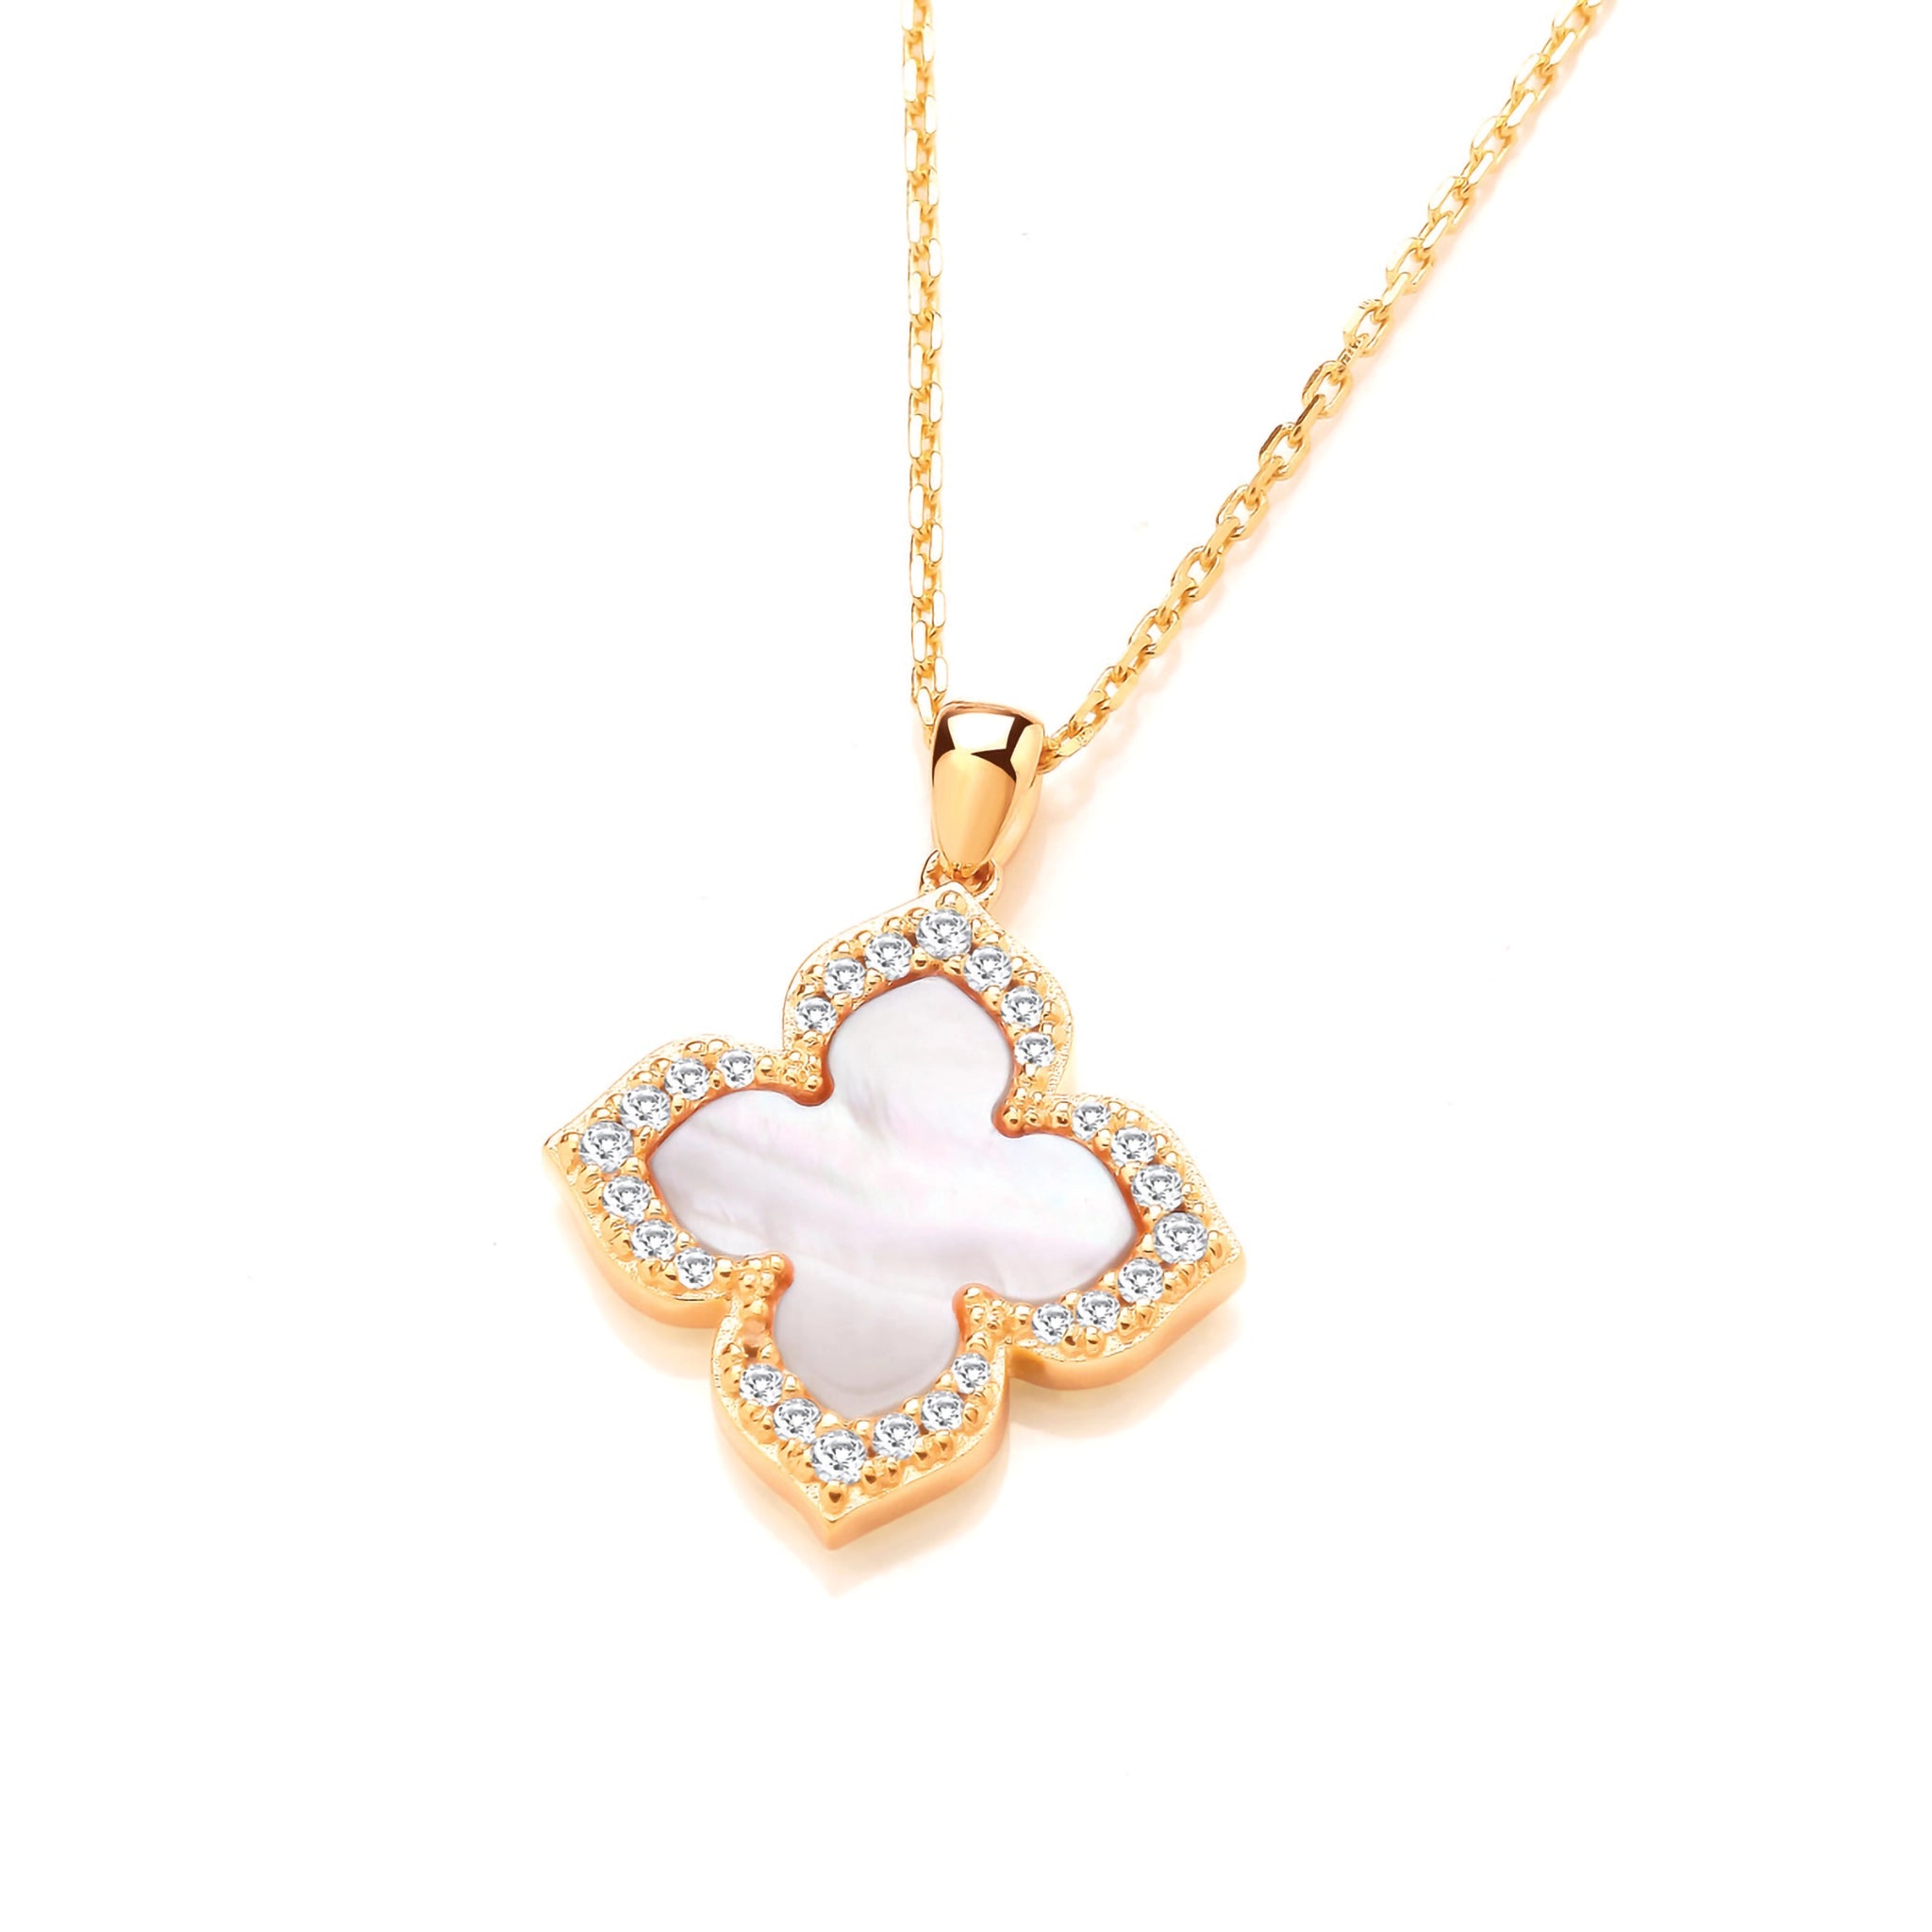 A gold clover necklace with CZ stones and pink mother of pearl centre